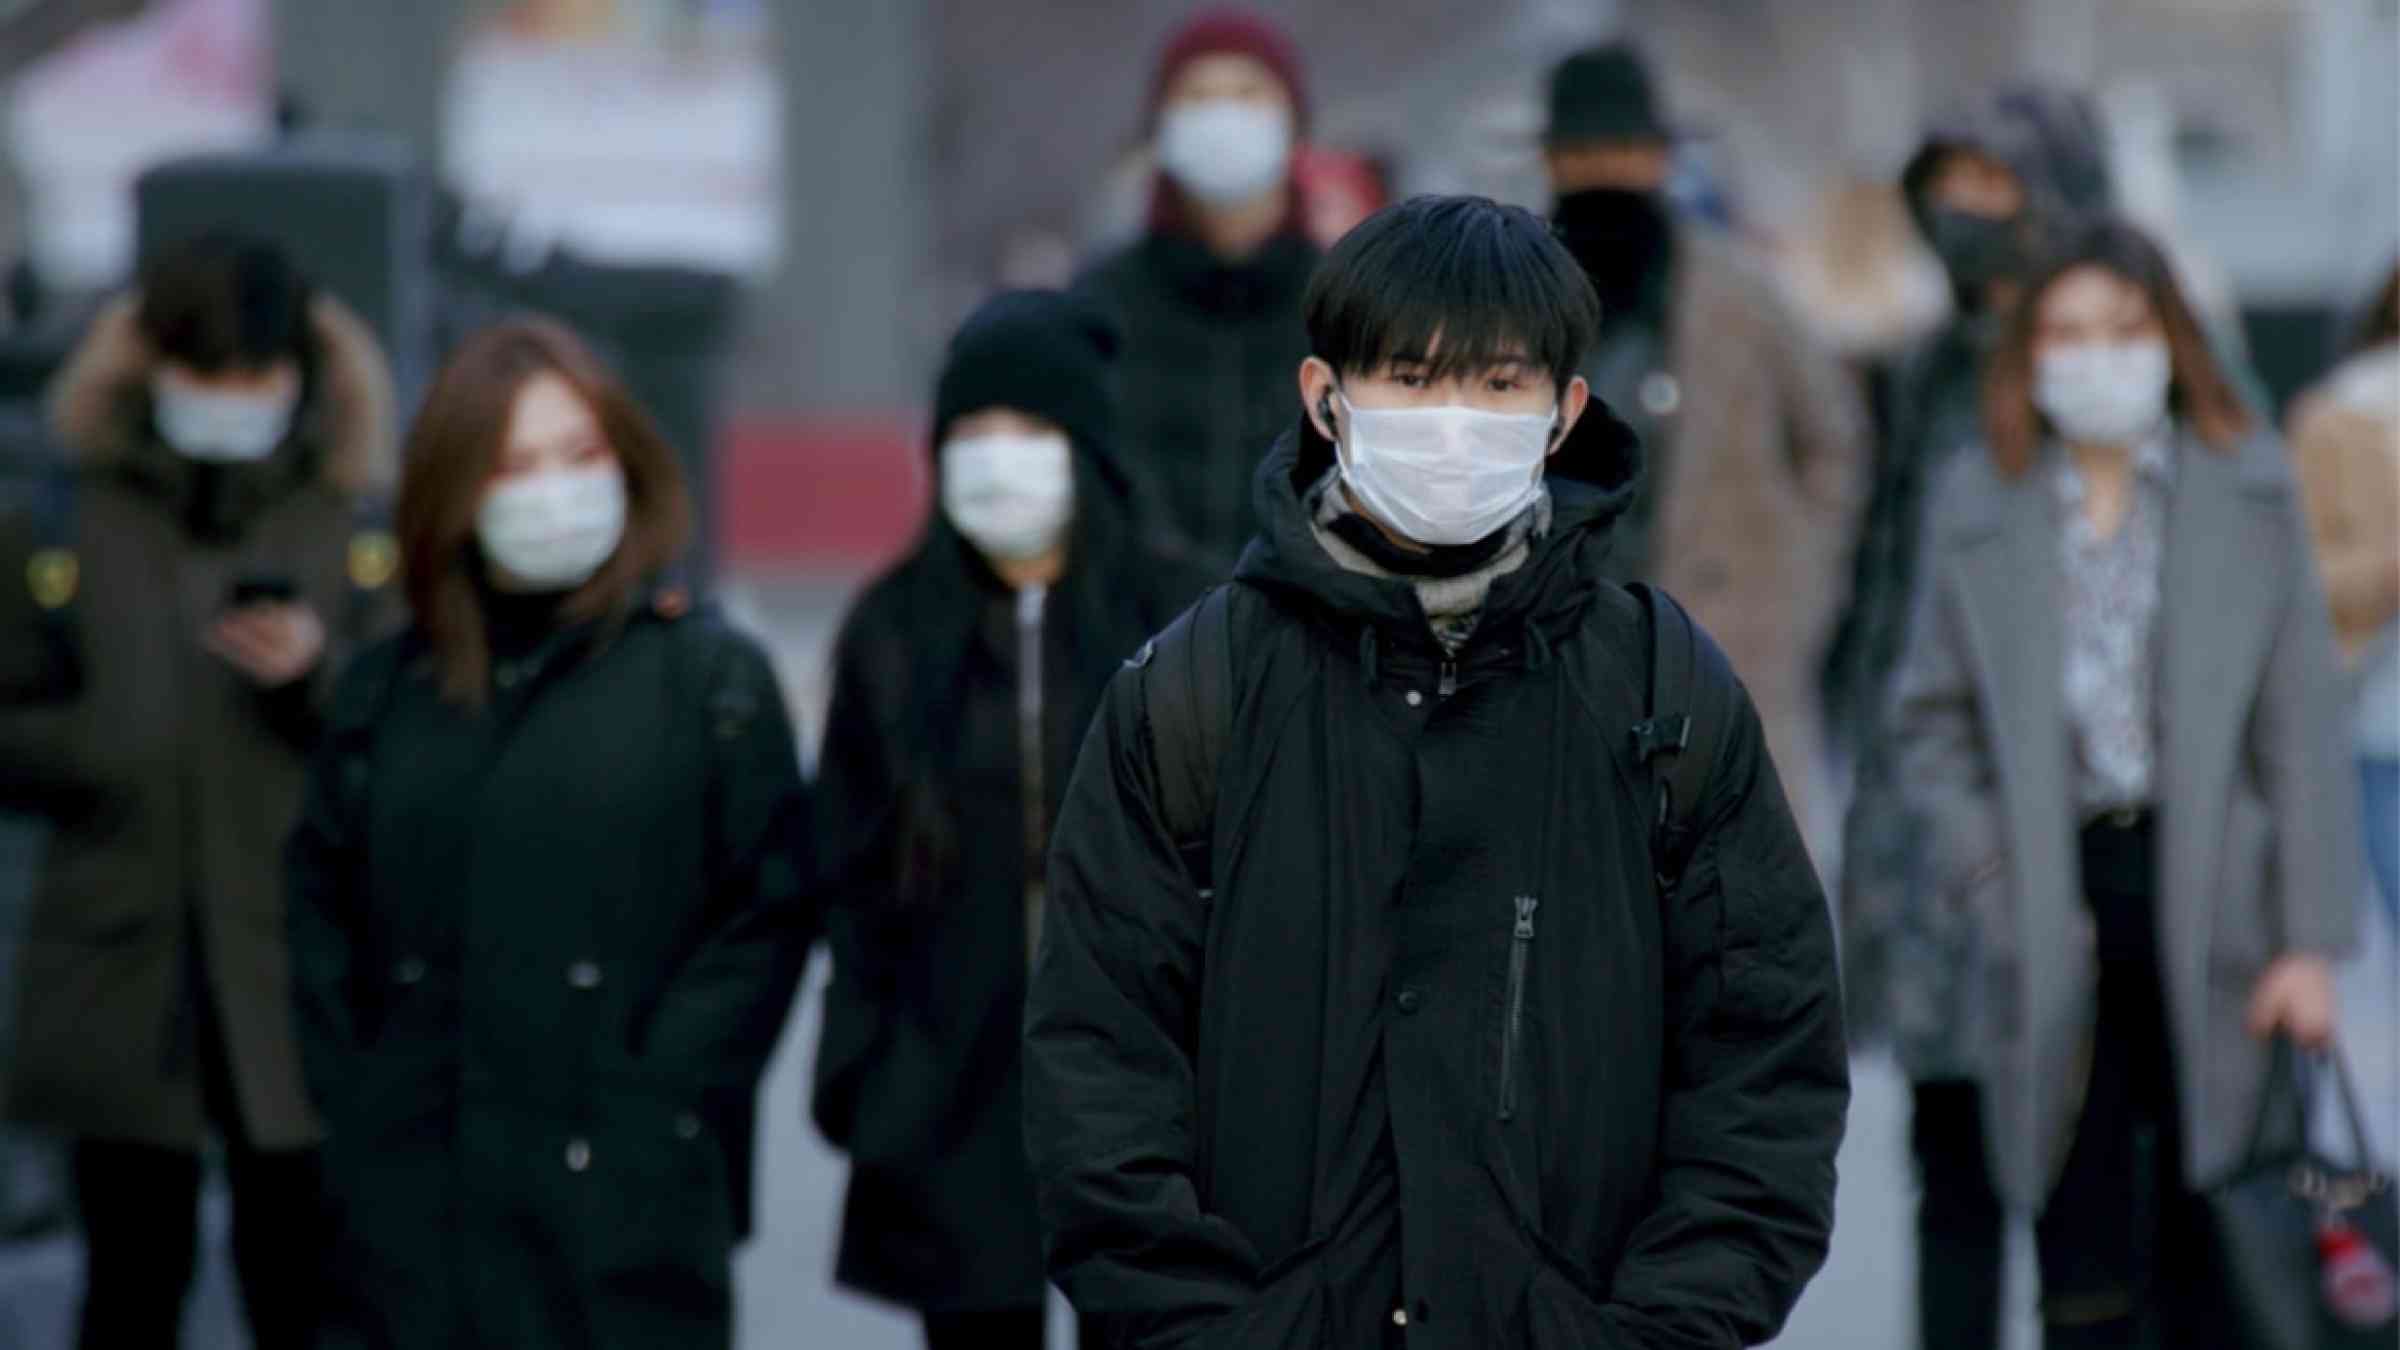 Man from South Korea walking through the streets waring a face mask for COVID-19 protection